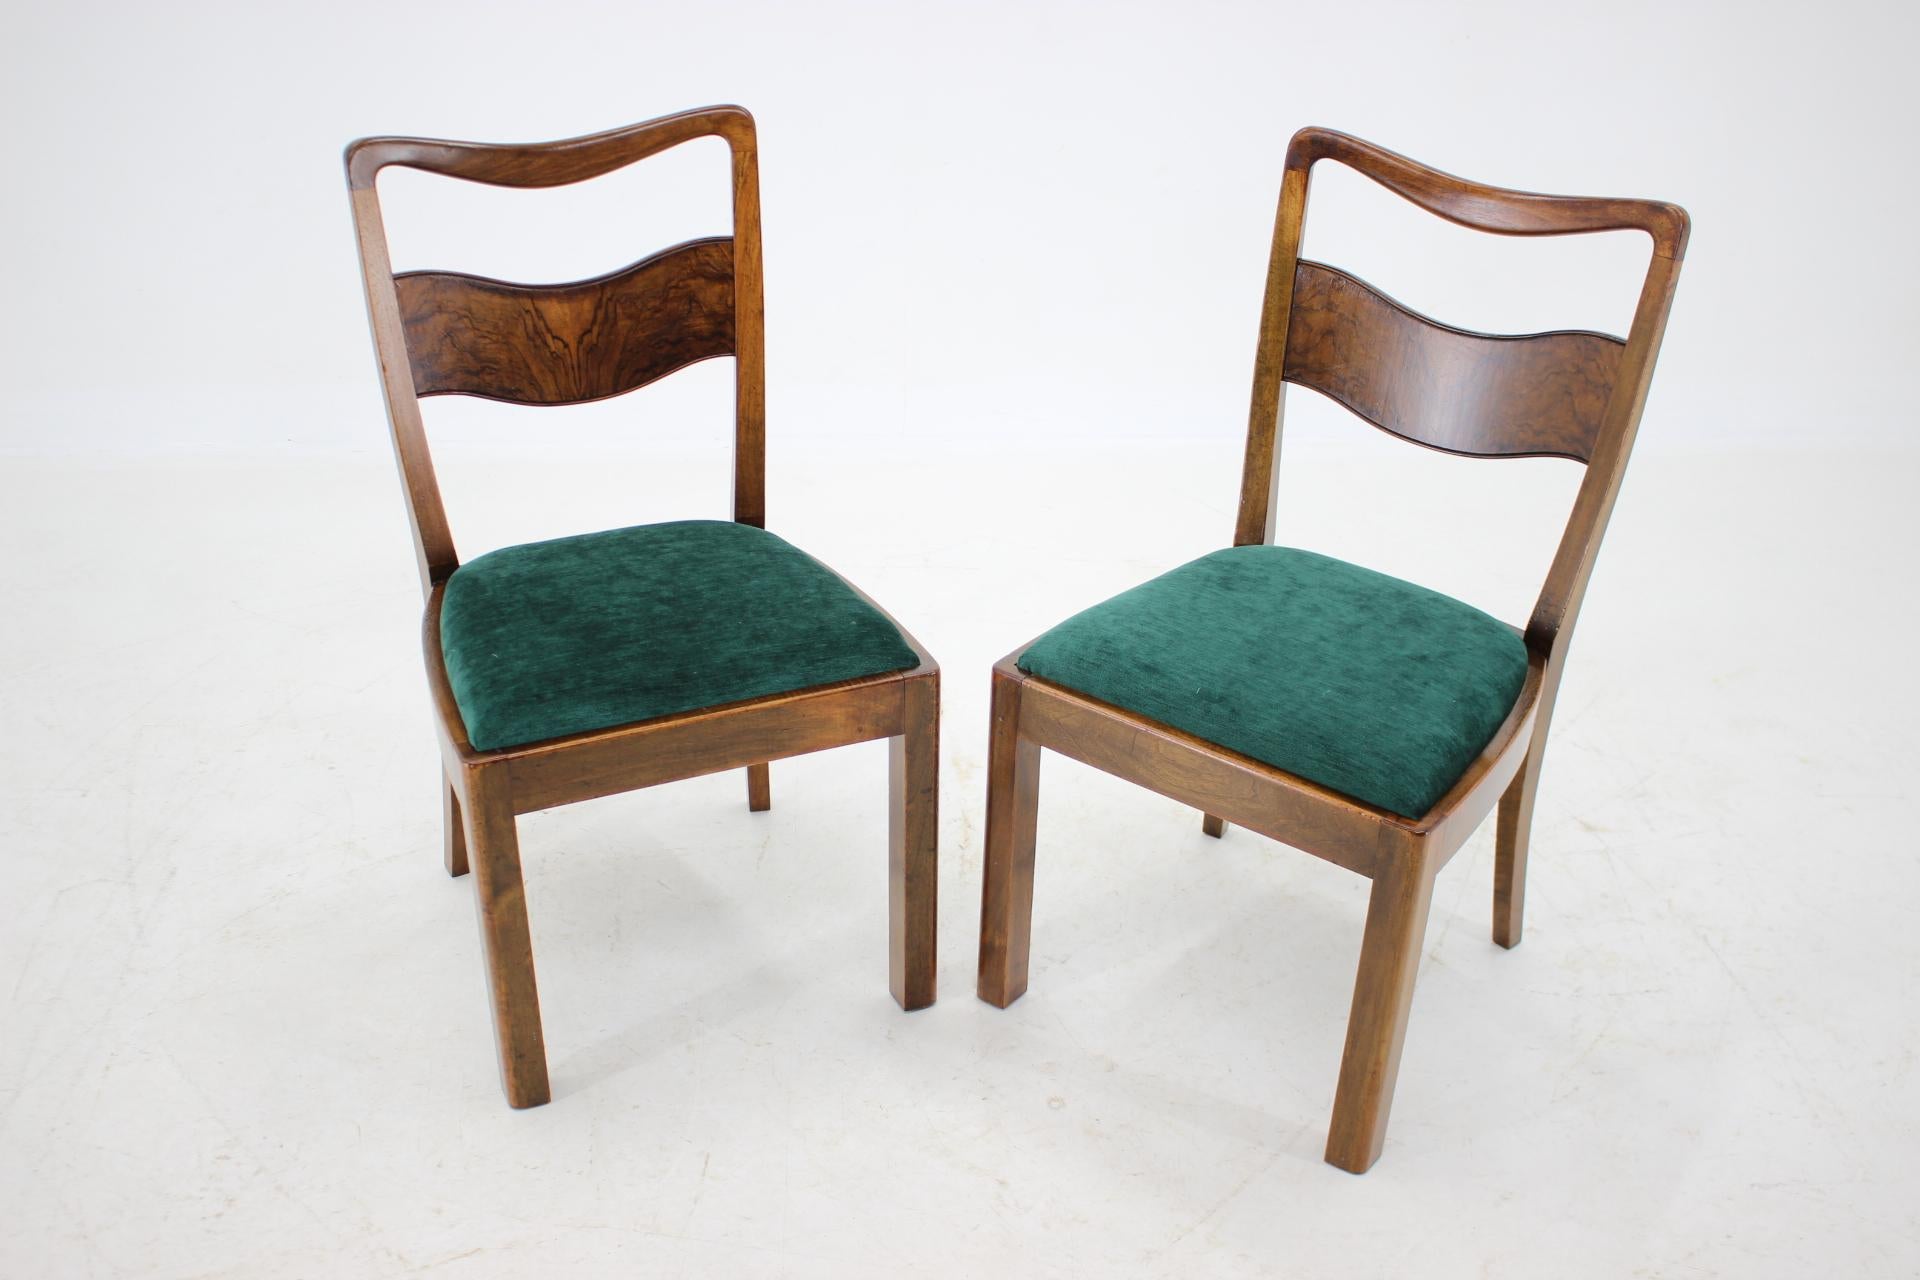 1930s Set of 4 Art Deco Dining Chairs, Czechoslovakia For Sale 2